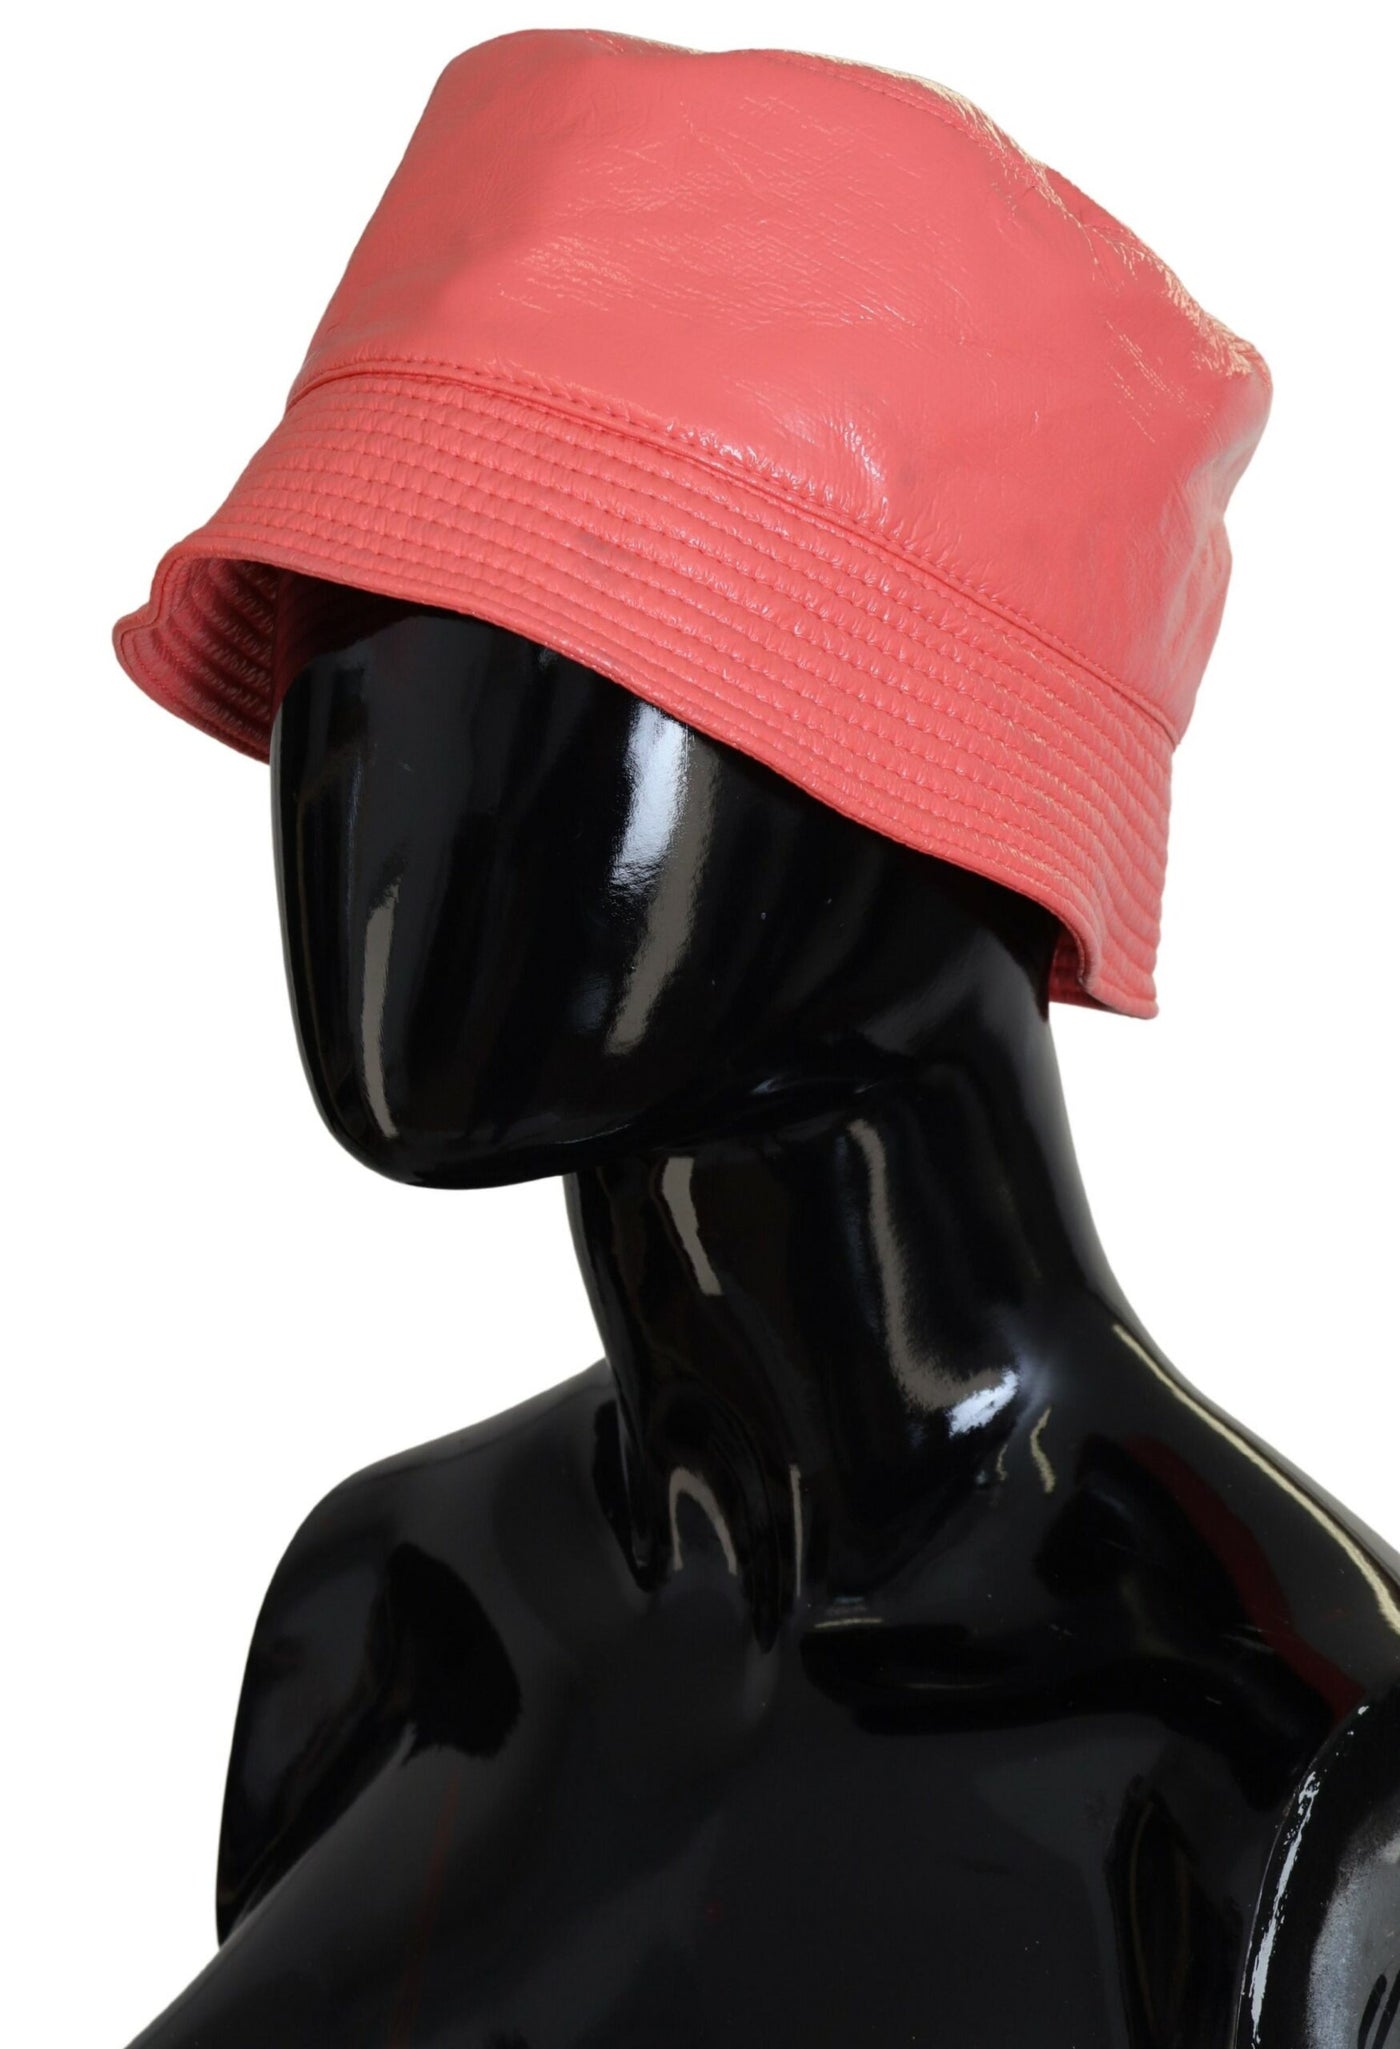 Dolce & Gabbana Peach Quilted Faux Leather Women Bucket Cap Hat